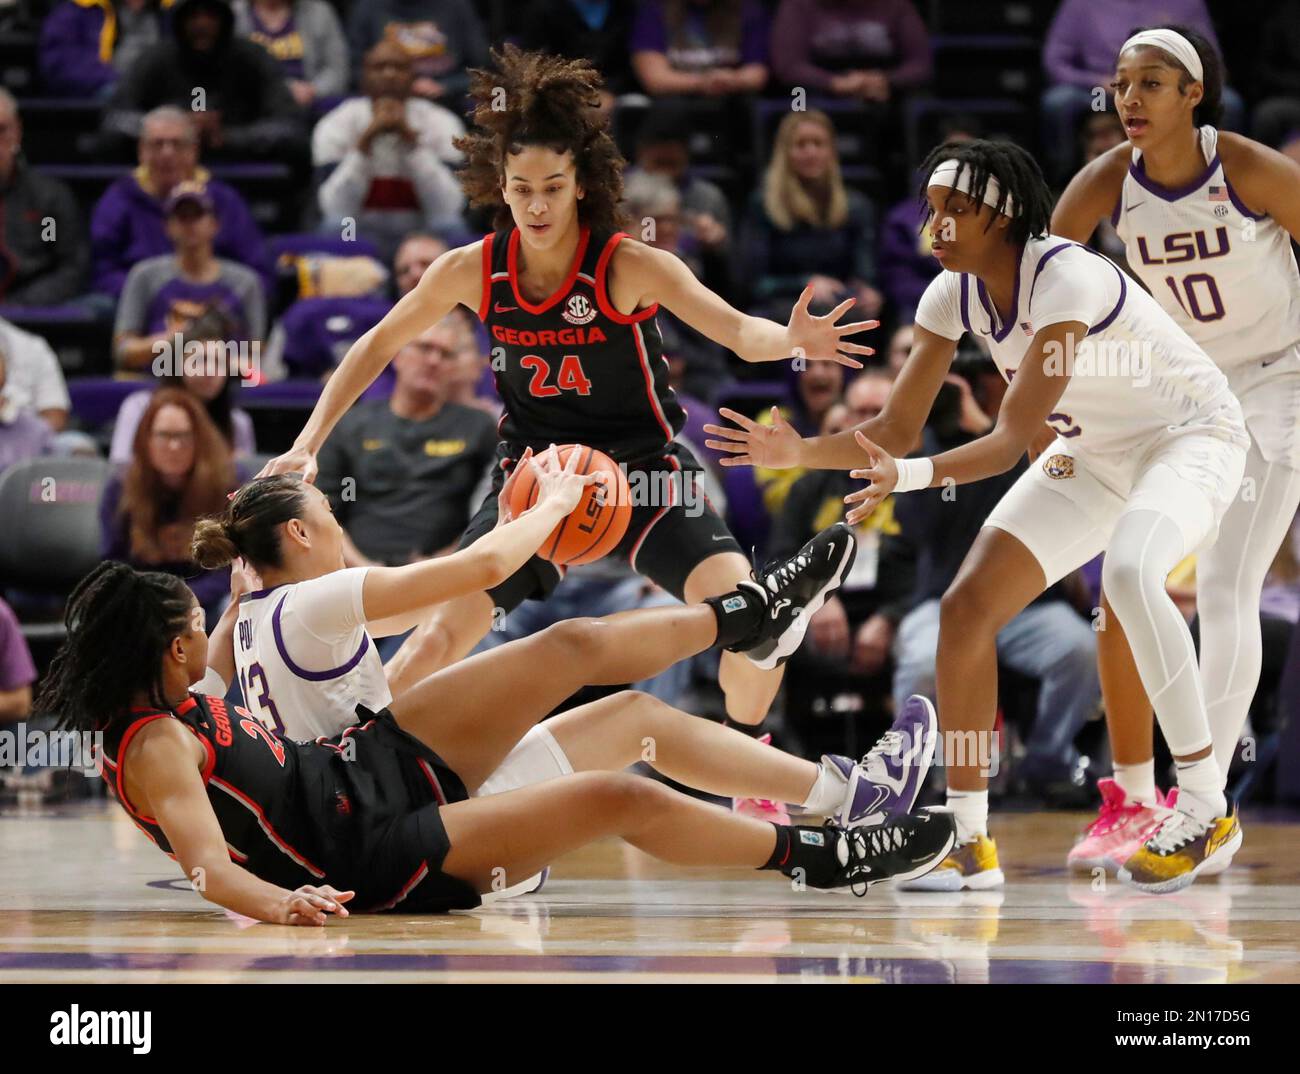 Baton Rouge, USA. 02nd Feb, 2023. LSU Lady Tigers guard Last-Tear Poa (13) passes the ball while on the floor to LSU Lady Tigers forward Sa'Myah Smith (5) during a women's college basketball game at the Pete Maravich Assembly Center in Baton Rouge, Louisiana on Thursday, February 2, 2023. (Photo by Peter G. Forest/Sipa USA) Credit: Sipa USA/Alamy Live News Stock Photo